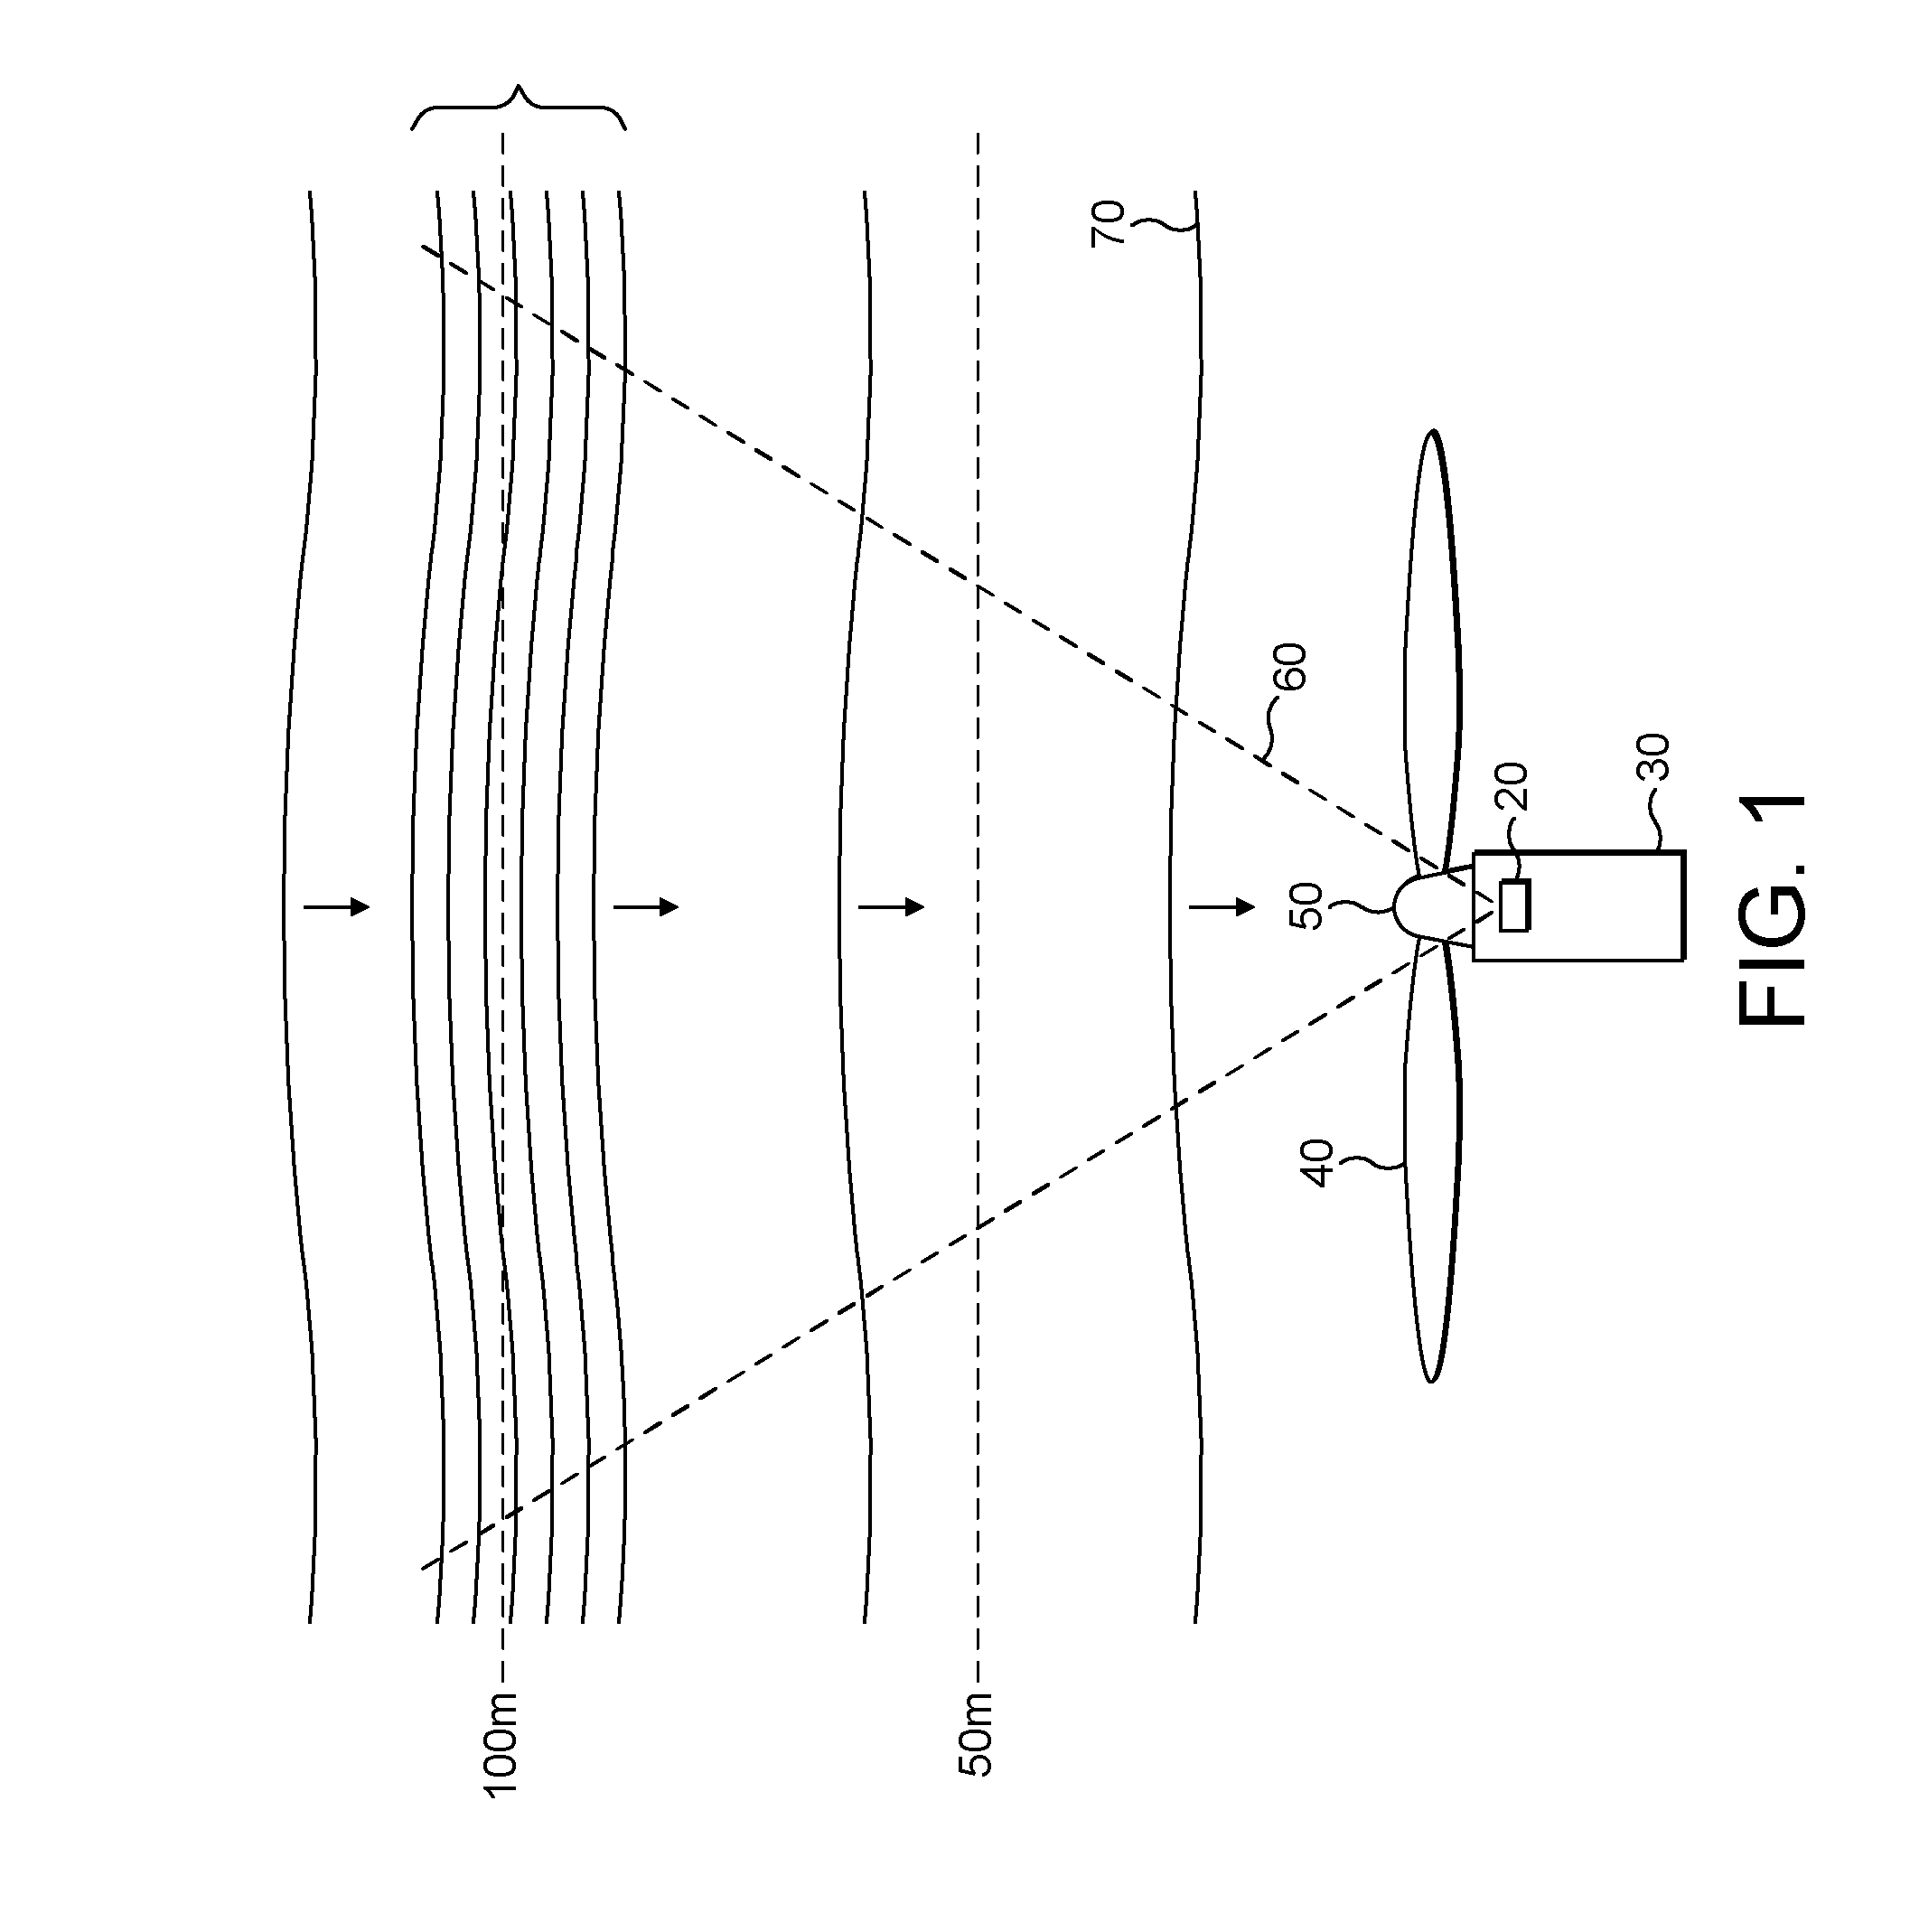 Method and apparatus for protecting wind turbines from extreme events